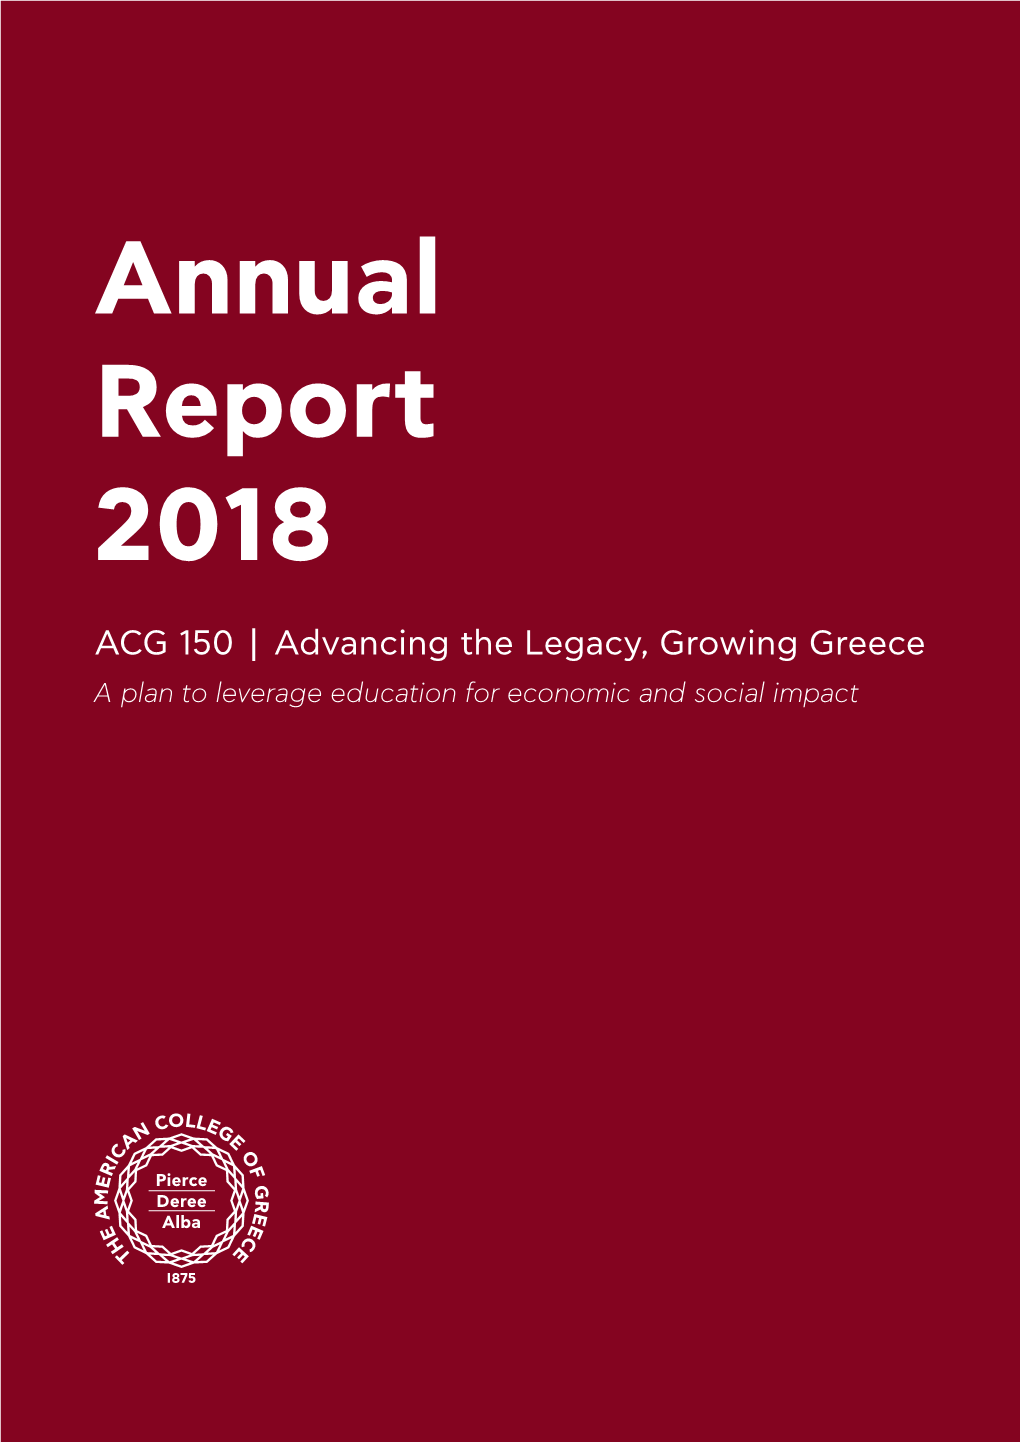 Annual Report 2018 ACG 150 | Advancing the Legacy, Growing Greece a Plan to Leverage Education for Economic and Social Impact Table of Contents